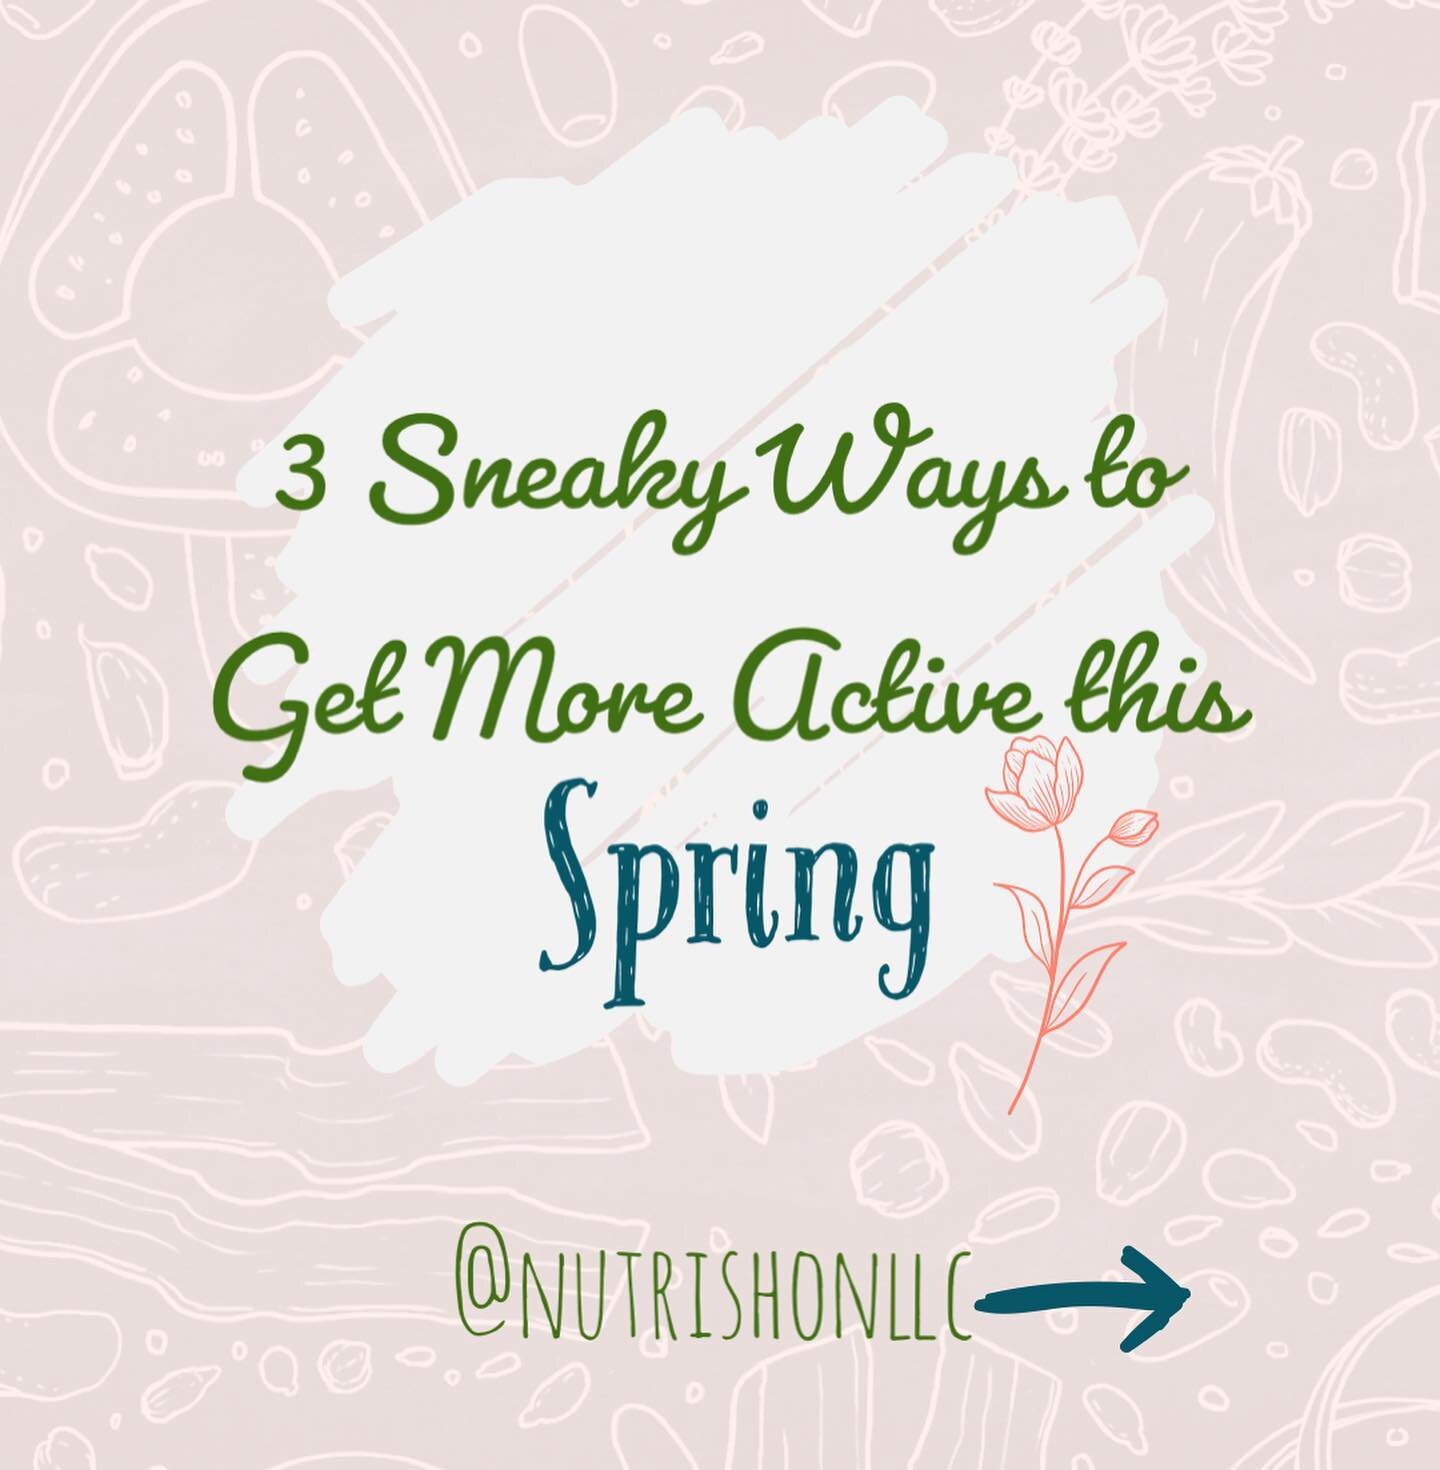 SHARE this post with your Spring workout bud! 🌷

Spring is here! The birds are chirping, the flowers are blooming, the sun is shining! 

The weather is changing to a more outdoor-activity friendly pattern. 

The following are 3 sneaky ways to squeez